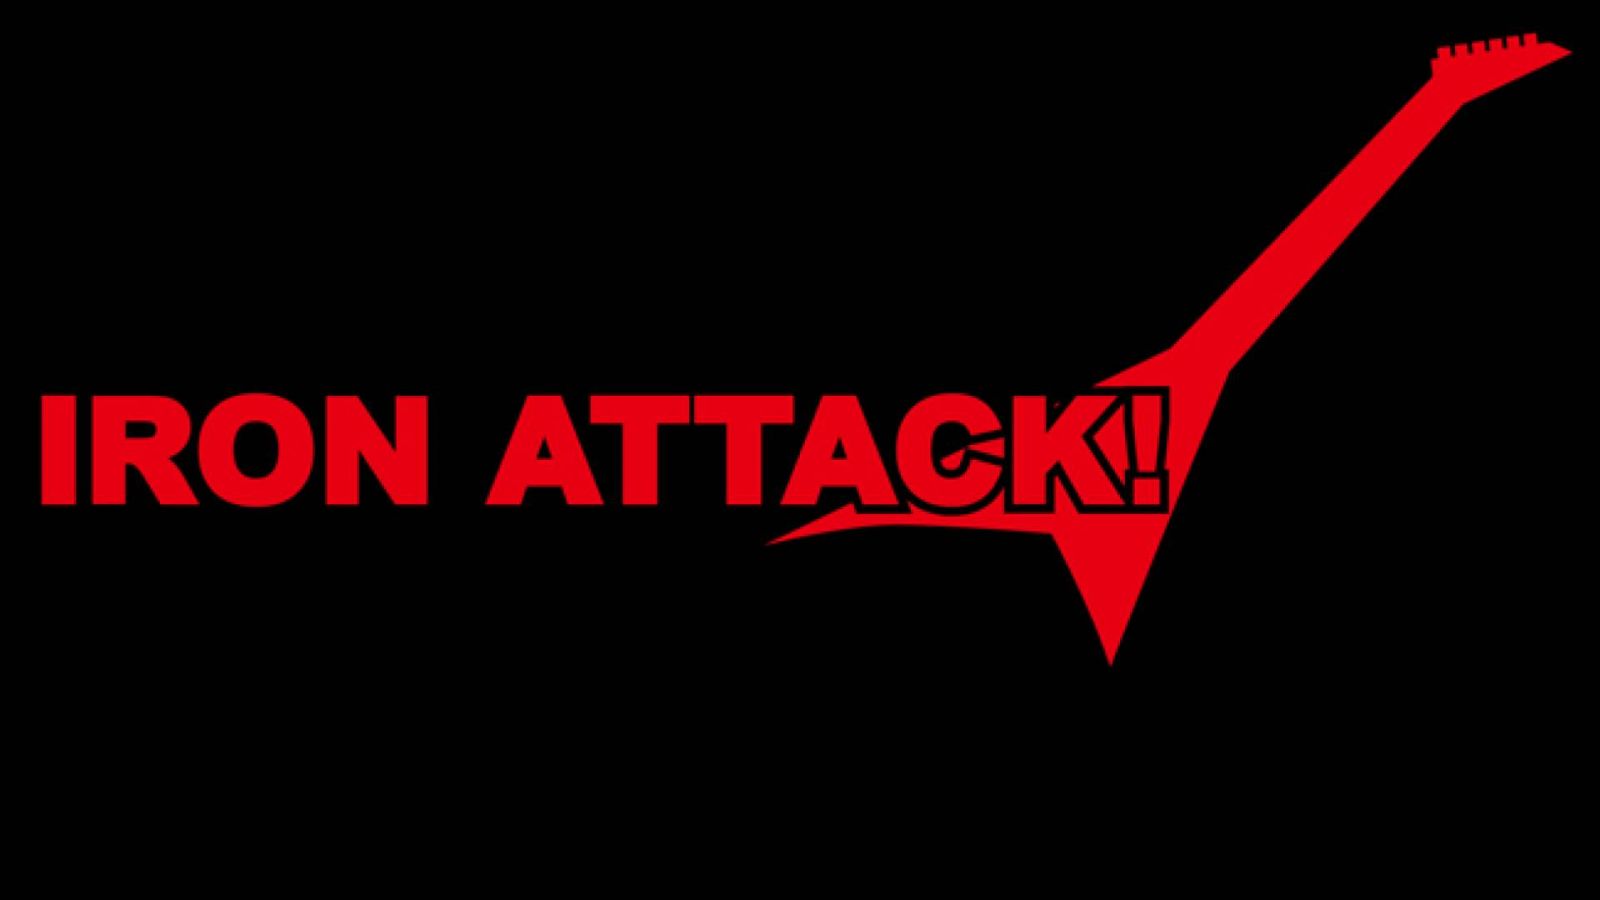 Nouvel album d'IRON ATTACK © 2015 IRON ATTACK! All rights reserved.